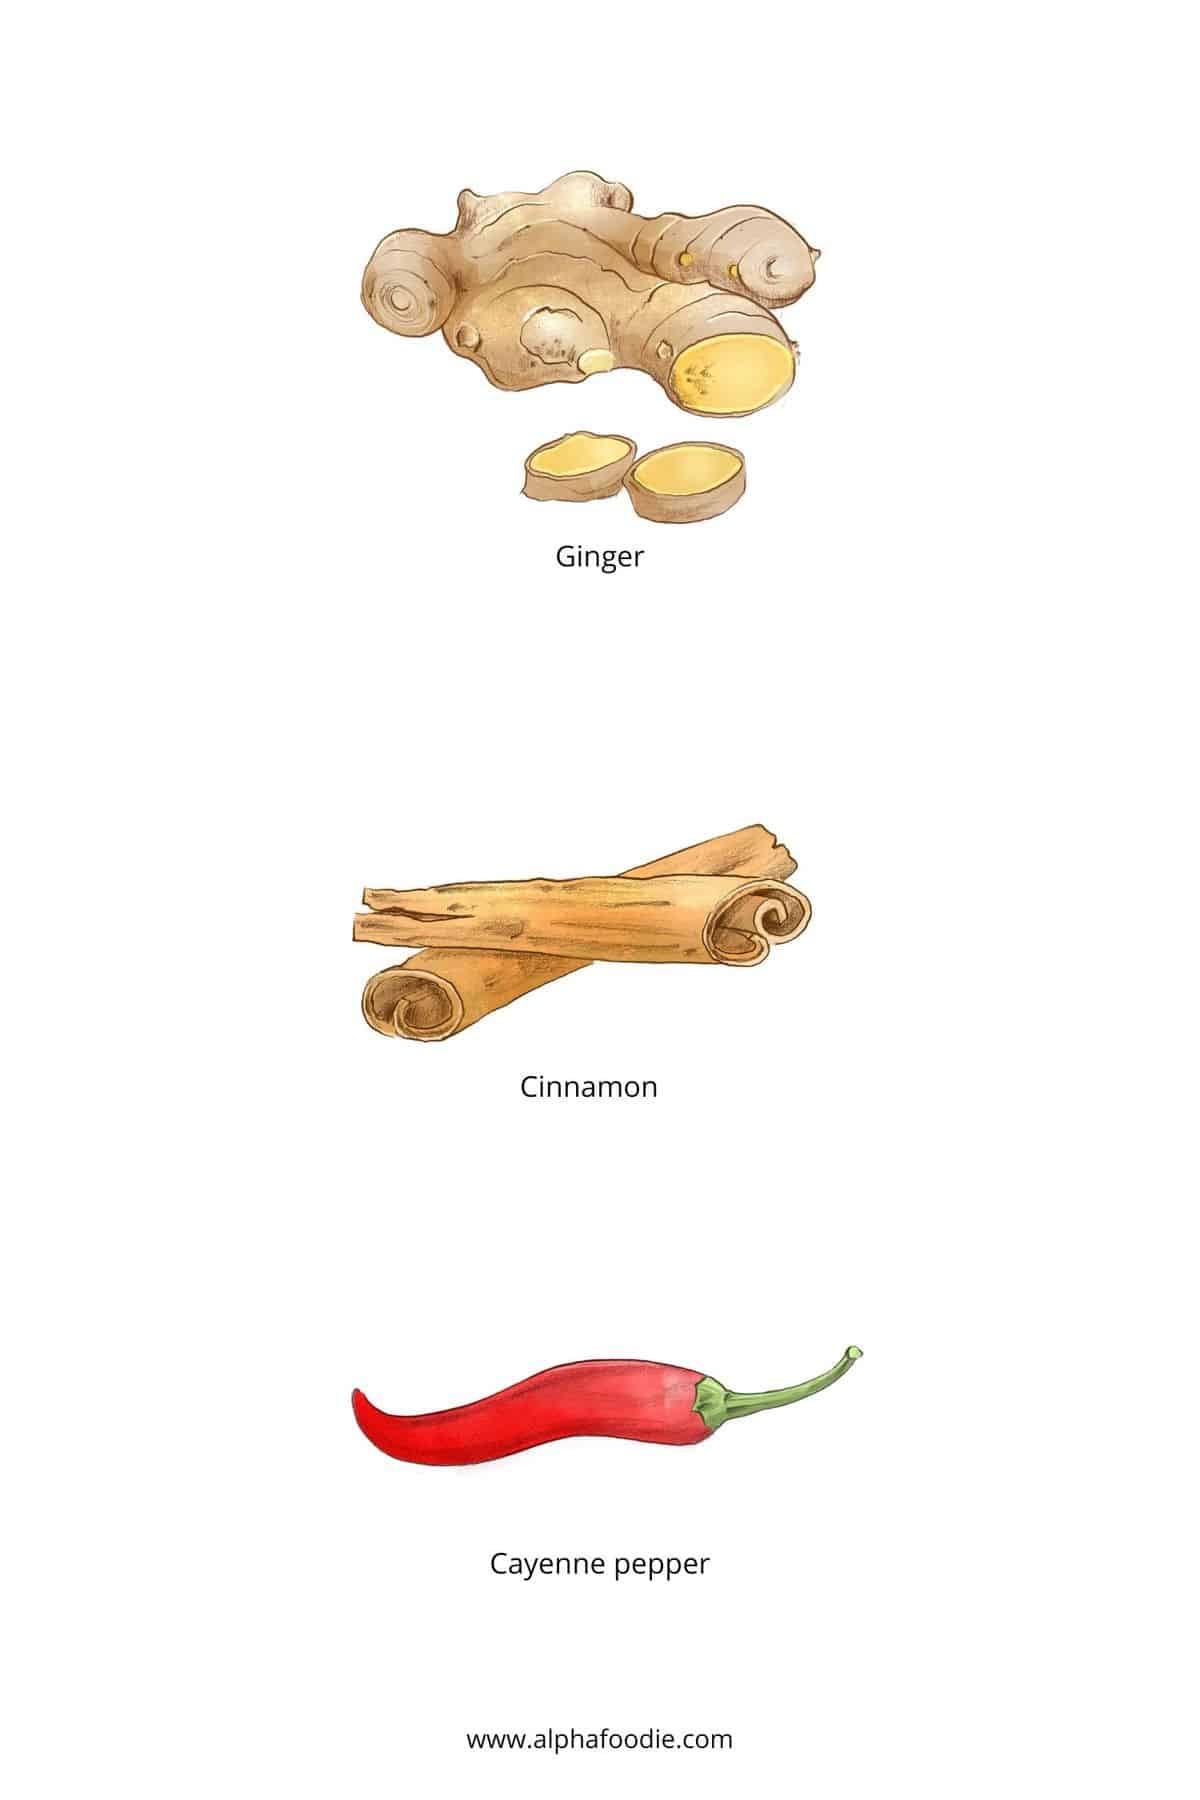 Drawings of spices to make flavored water